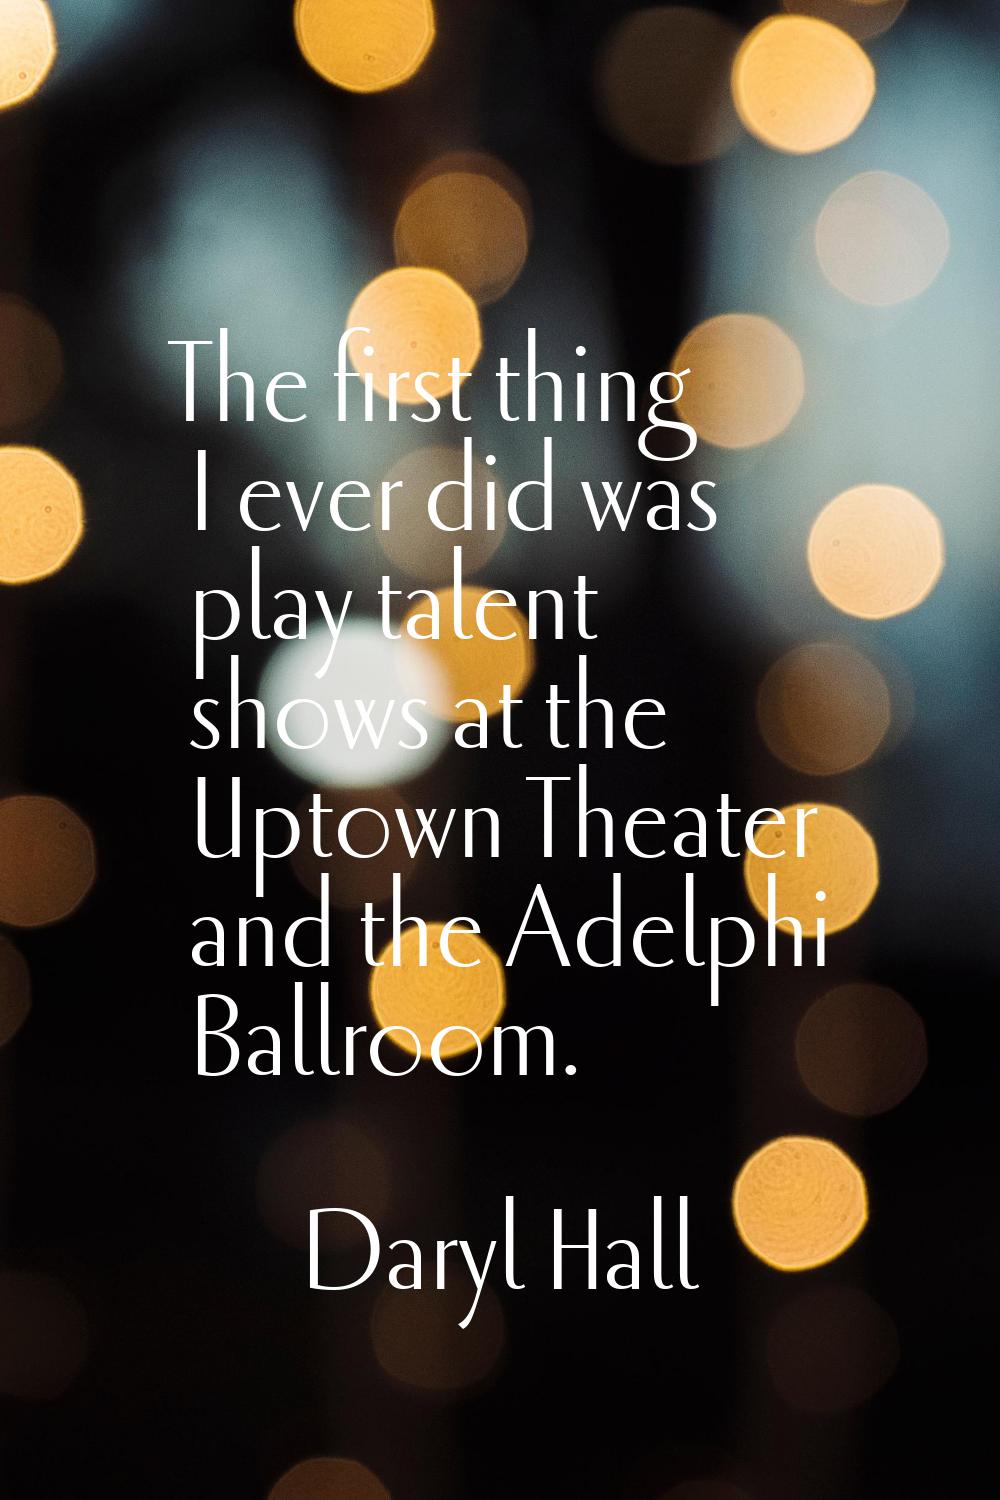 The first thing I ever did was play talent shows at the Uptown Theater and the Adelphi Ballroom.